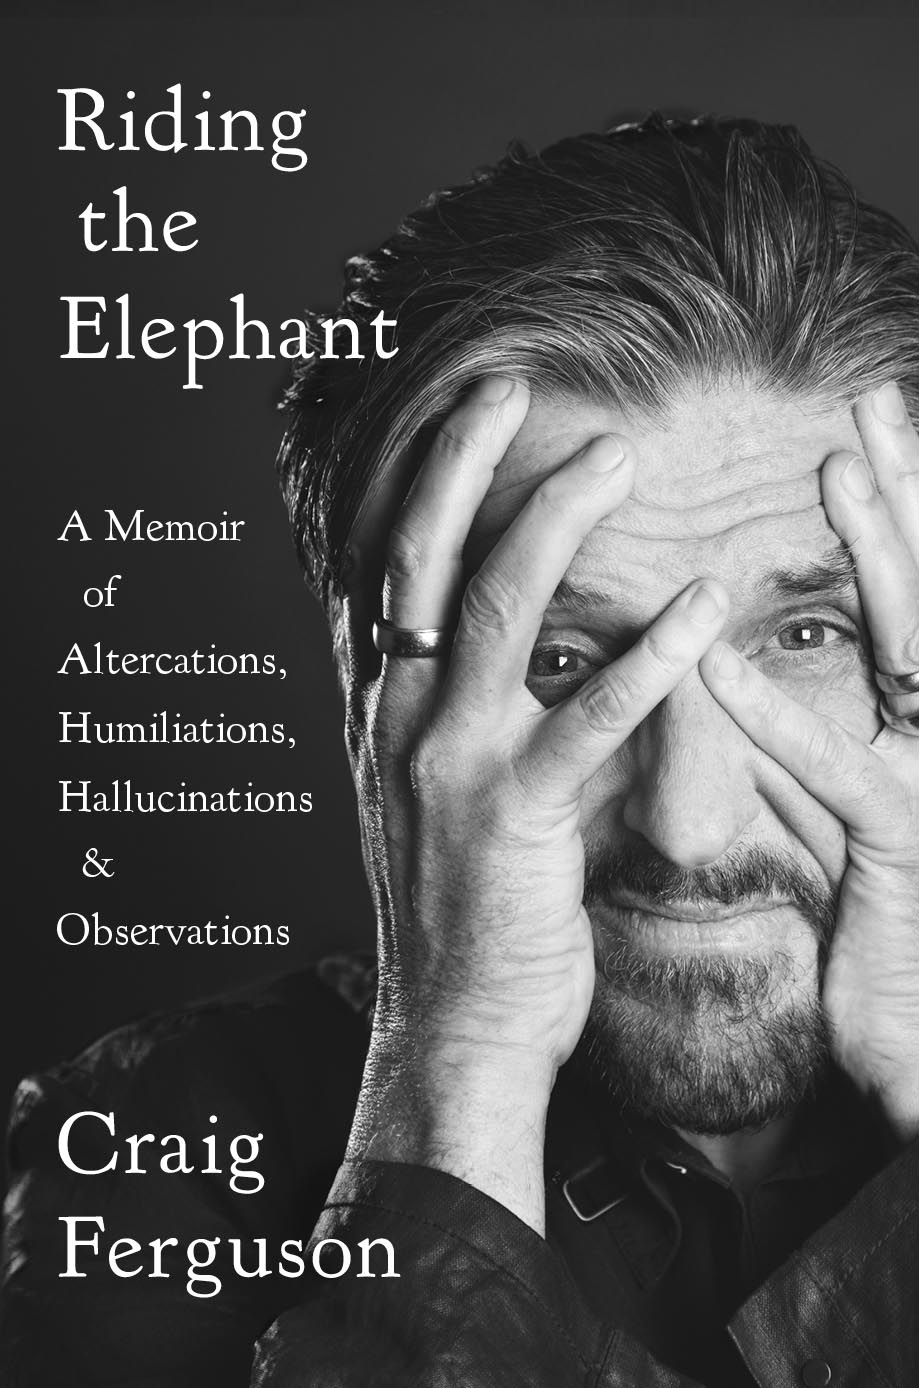 Craig Ferguson Reads from New MemoirRiding the Elephant: A Memoir of Altercations, Humiliations, Hallucinations, and Observations